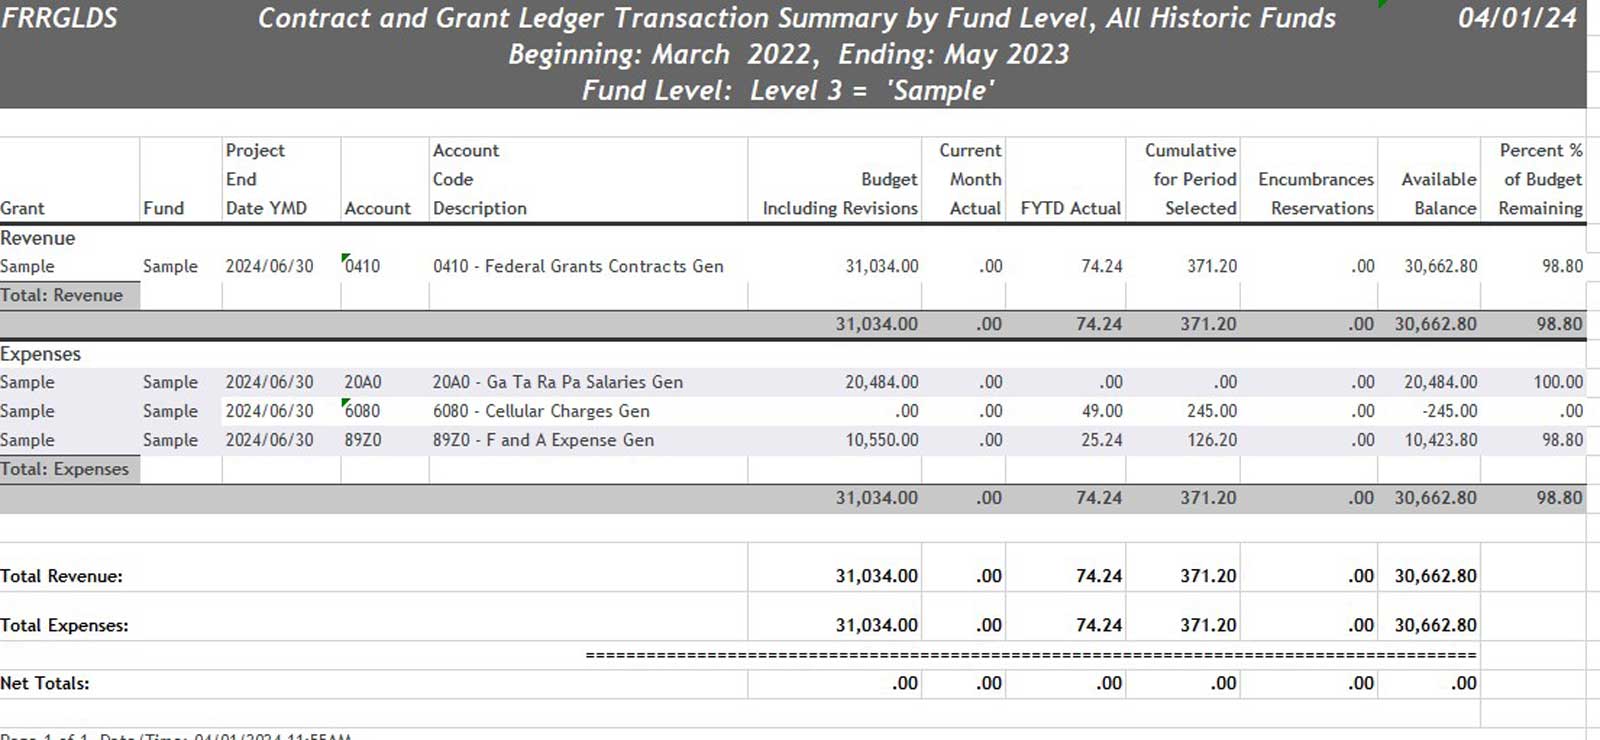 contract and grant ledger transaction summary table